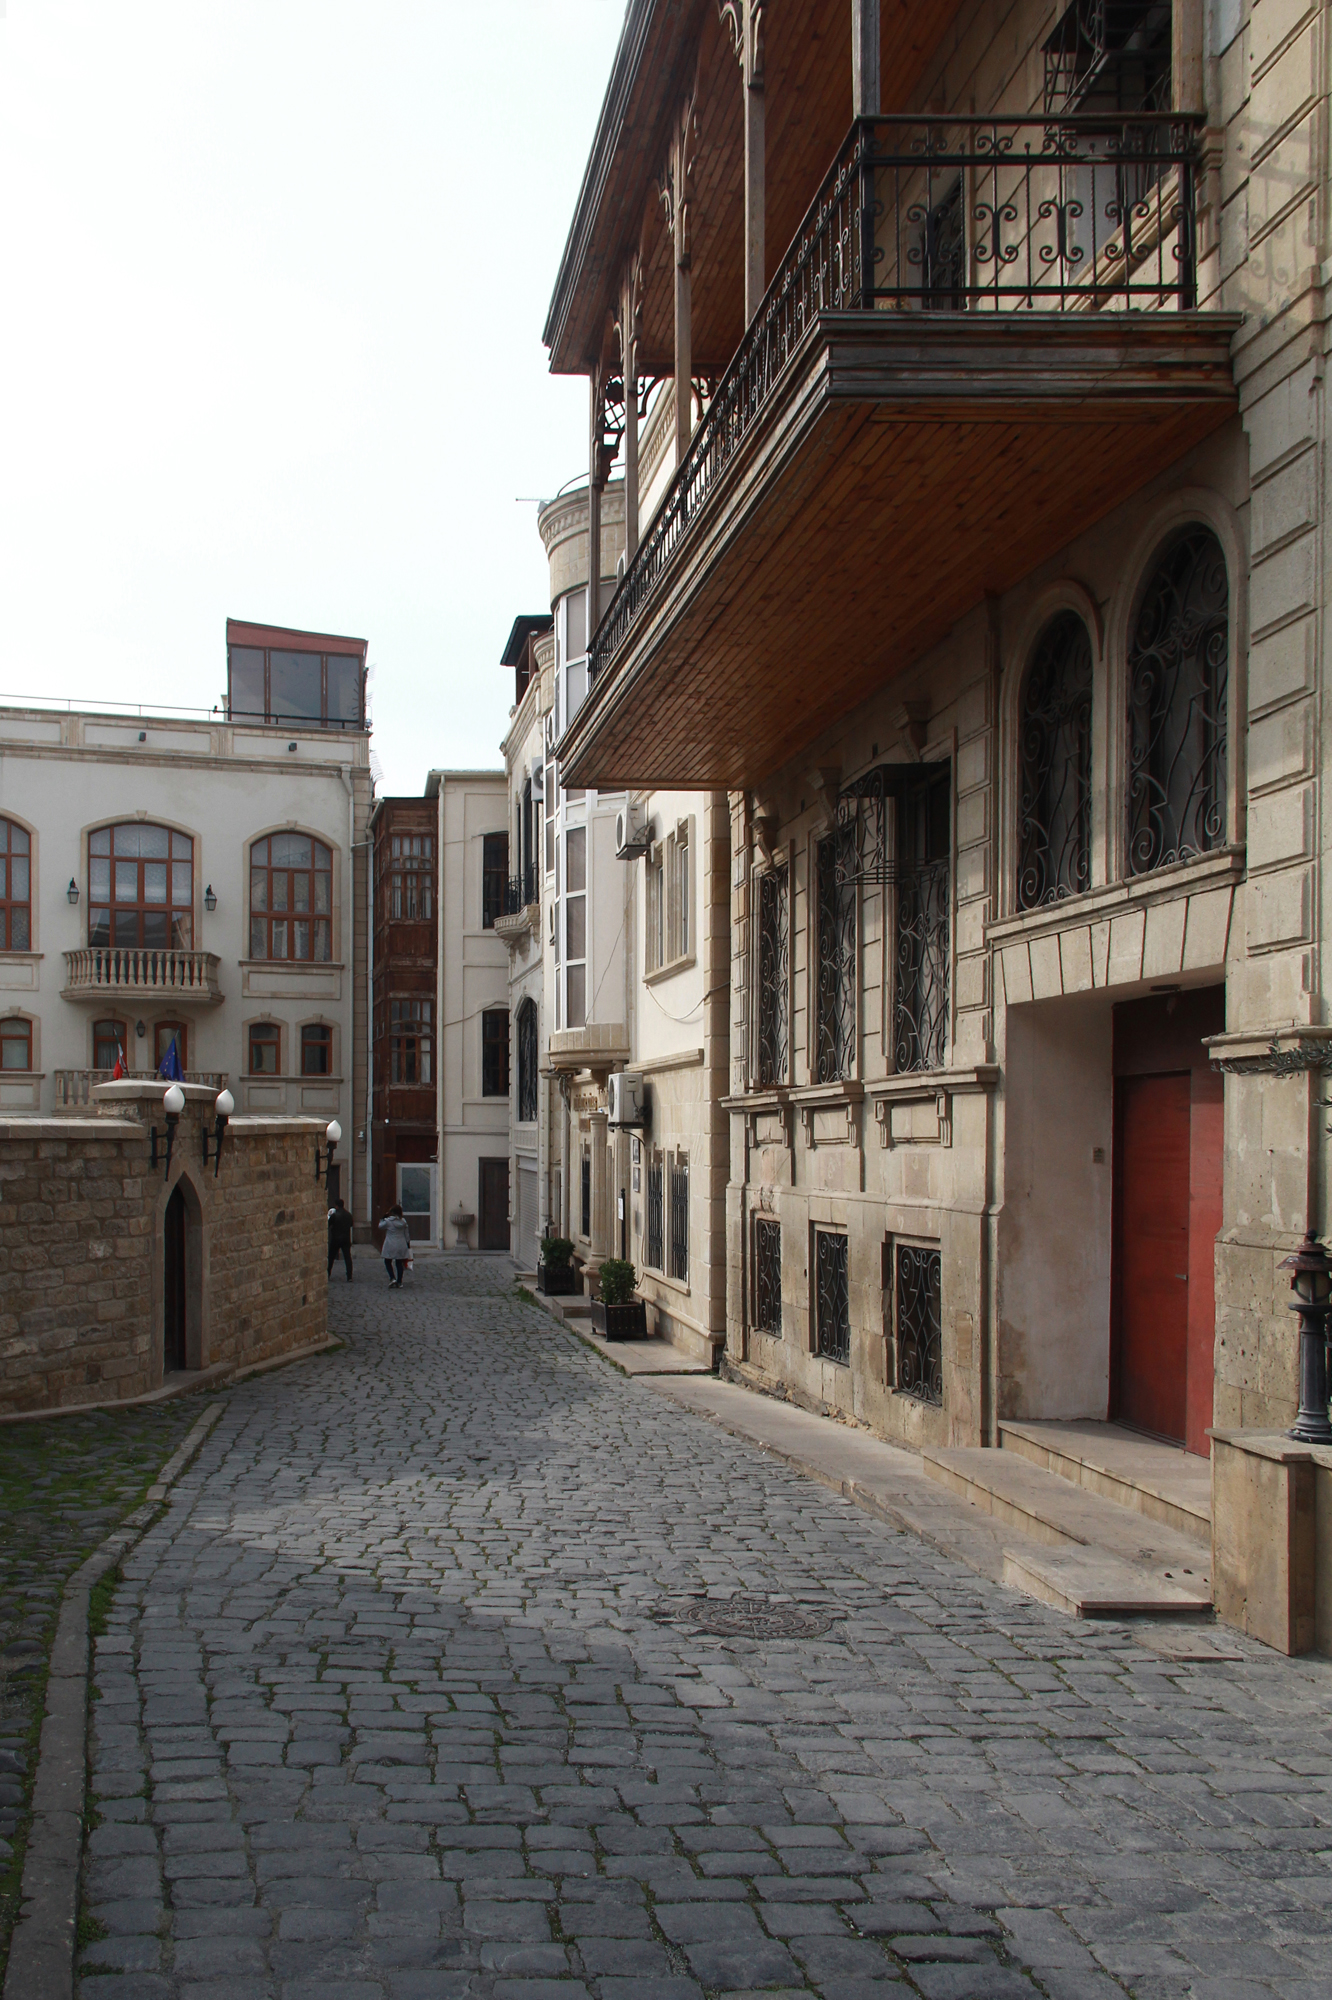 one of the internal streets of the old city, very peaceful and clean, gives a bit European feel as a sence of place. 